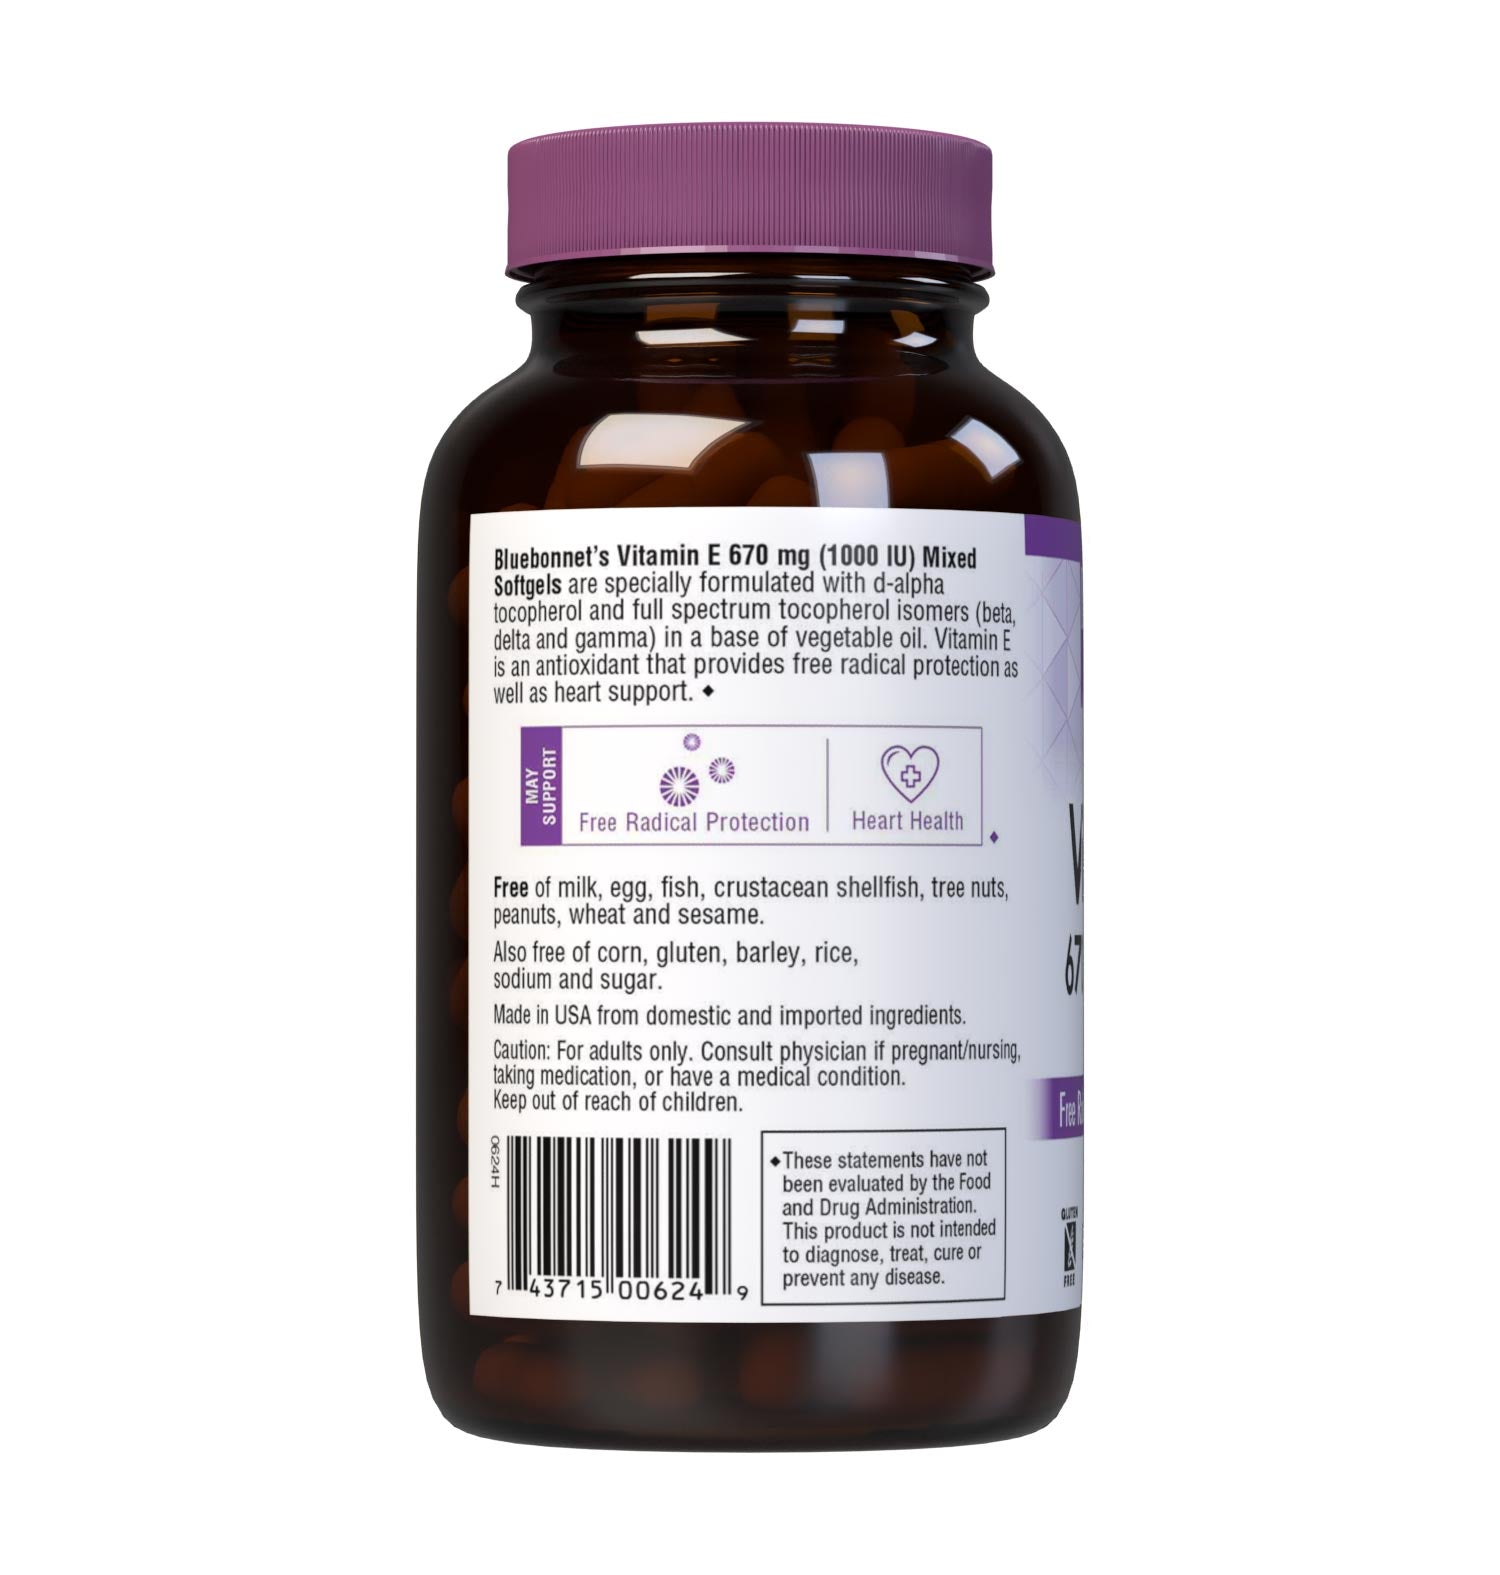 Bluebonnet’s Vitamin E 1000 lU (670 mg) Mixed Softgels are specially formulated with d-alpha tocopherol and full spectrum tocopherol isomers (beta, delta and gamma) in a base of vegetable oil. Vitamin E is an antioxidant that provides free radical protection as well as cardiovascular support. Description panel. #size_100 count